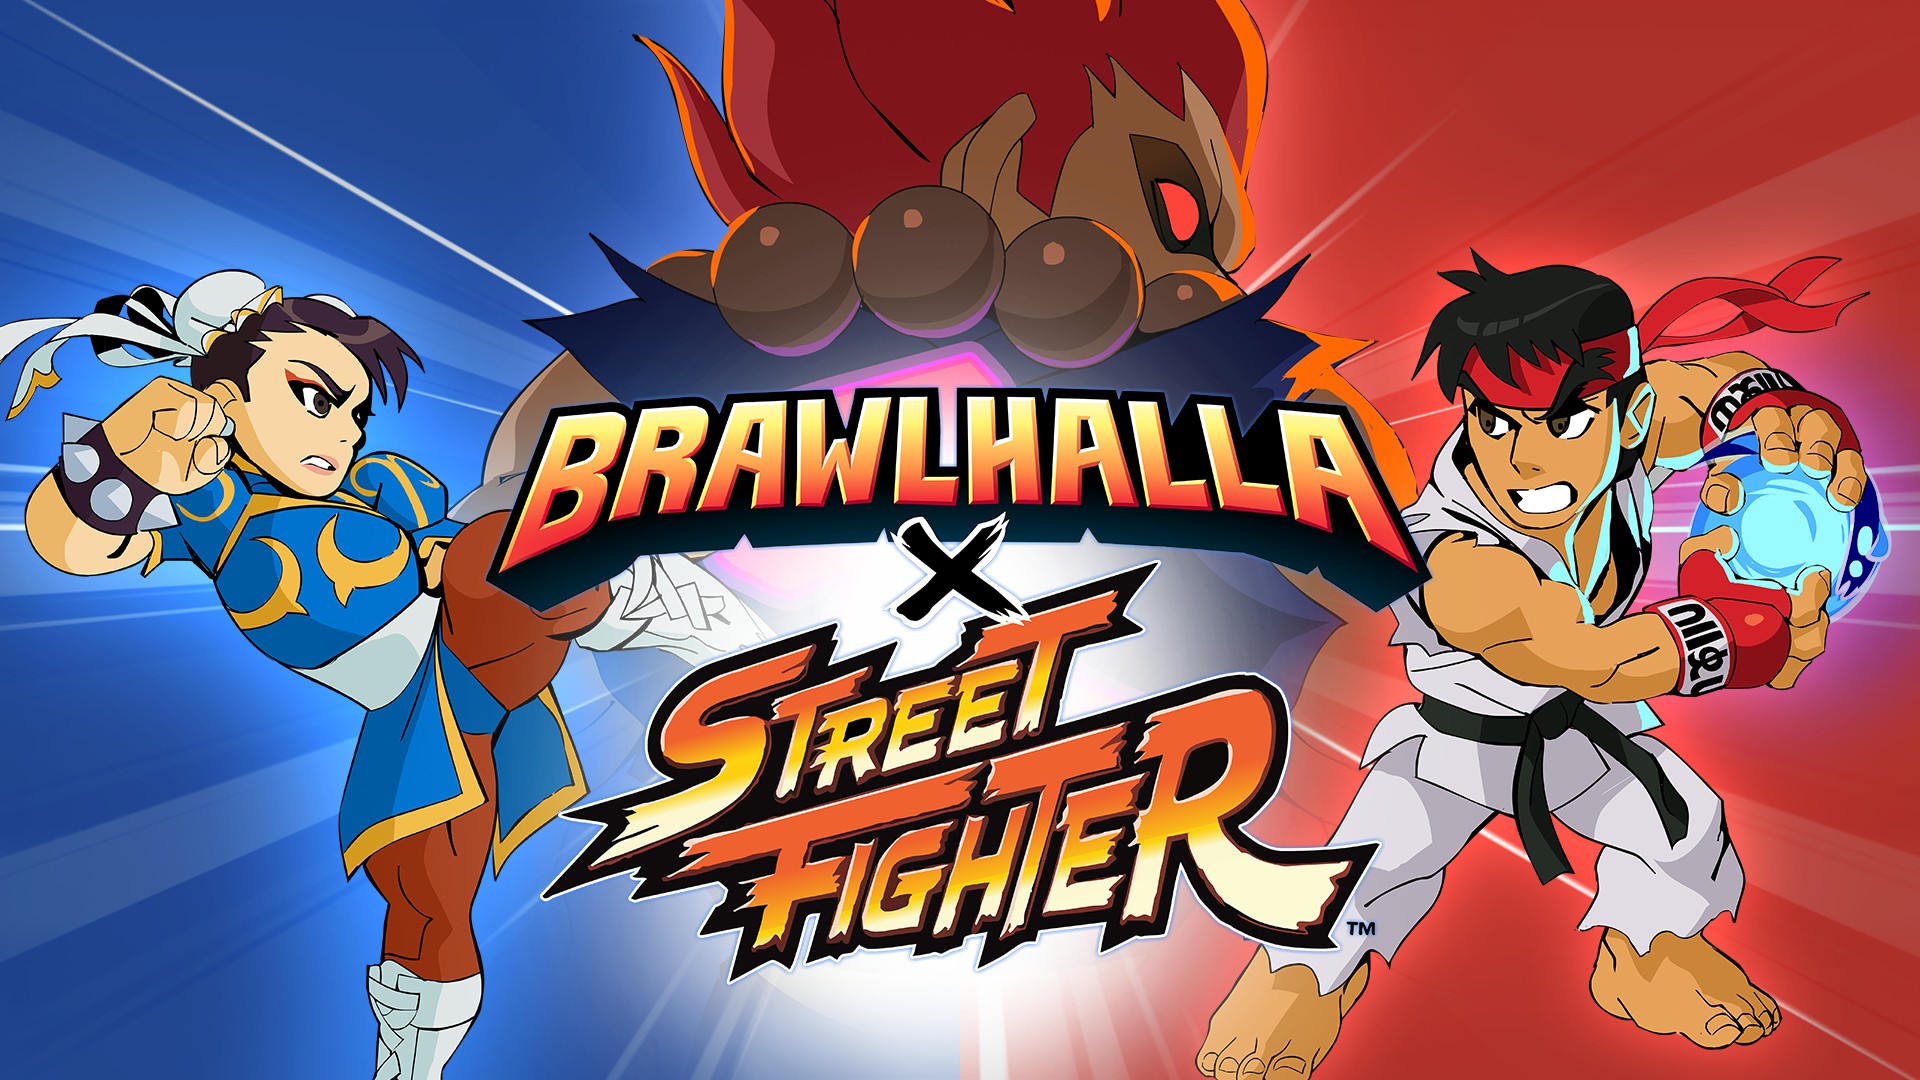 Enter The Heat Of Battle With Ryu, Chun-Li, and Akuma From Capcom’s Street Fighter In Brawlhalla Today